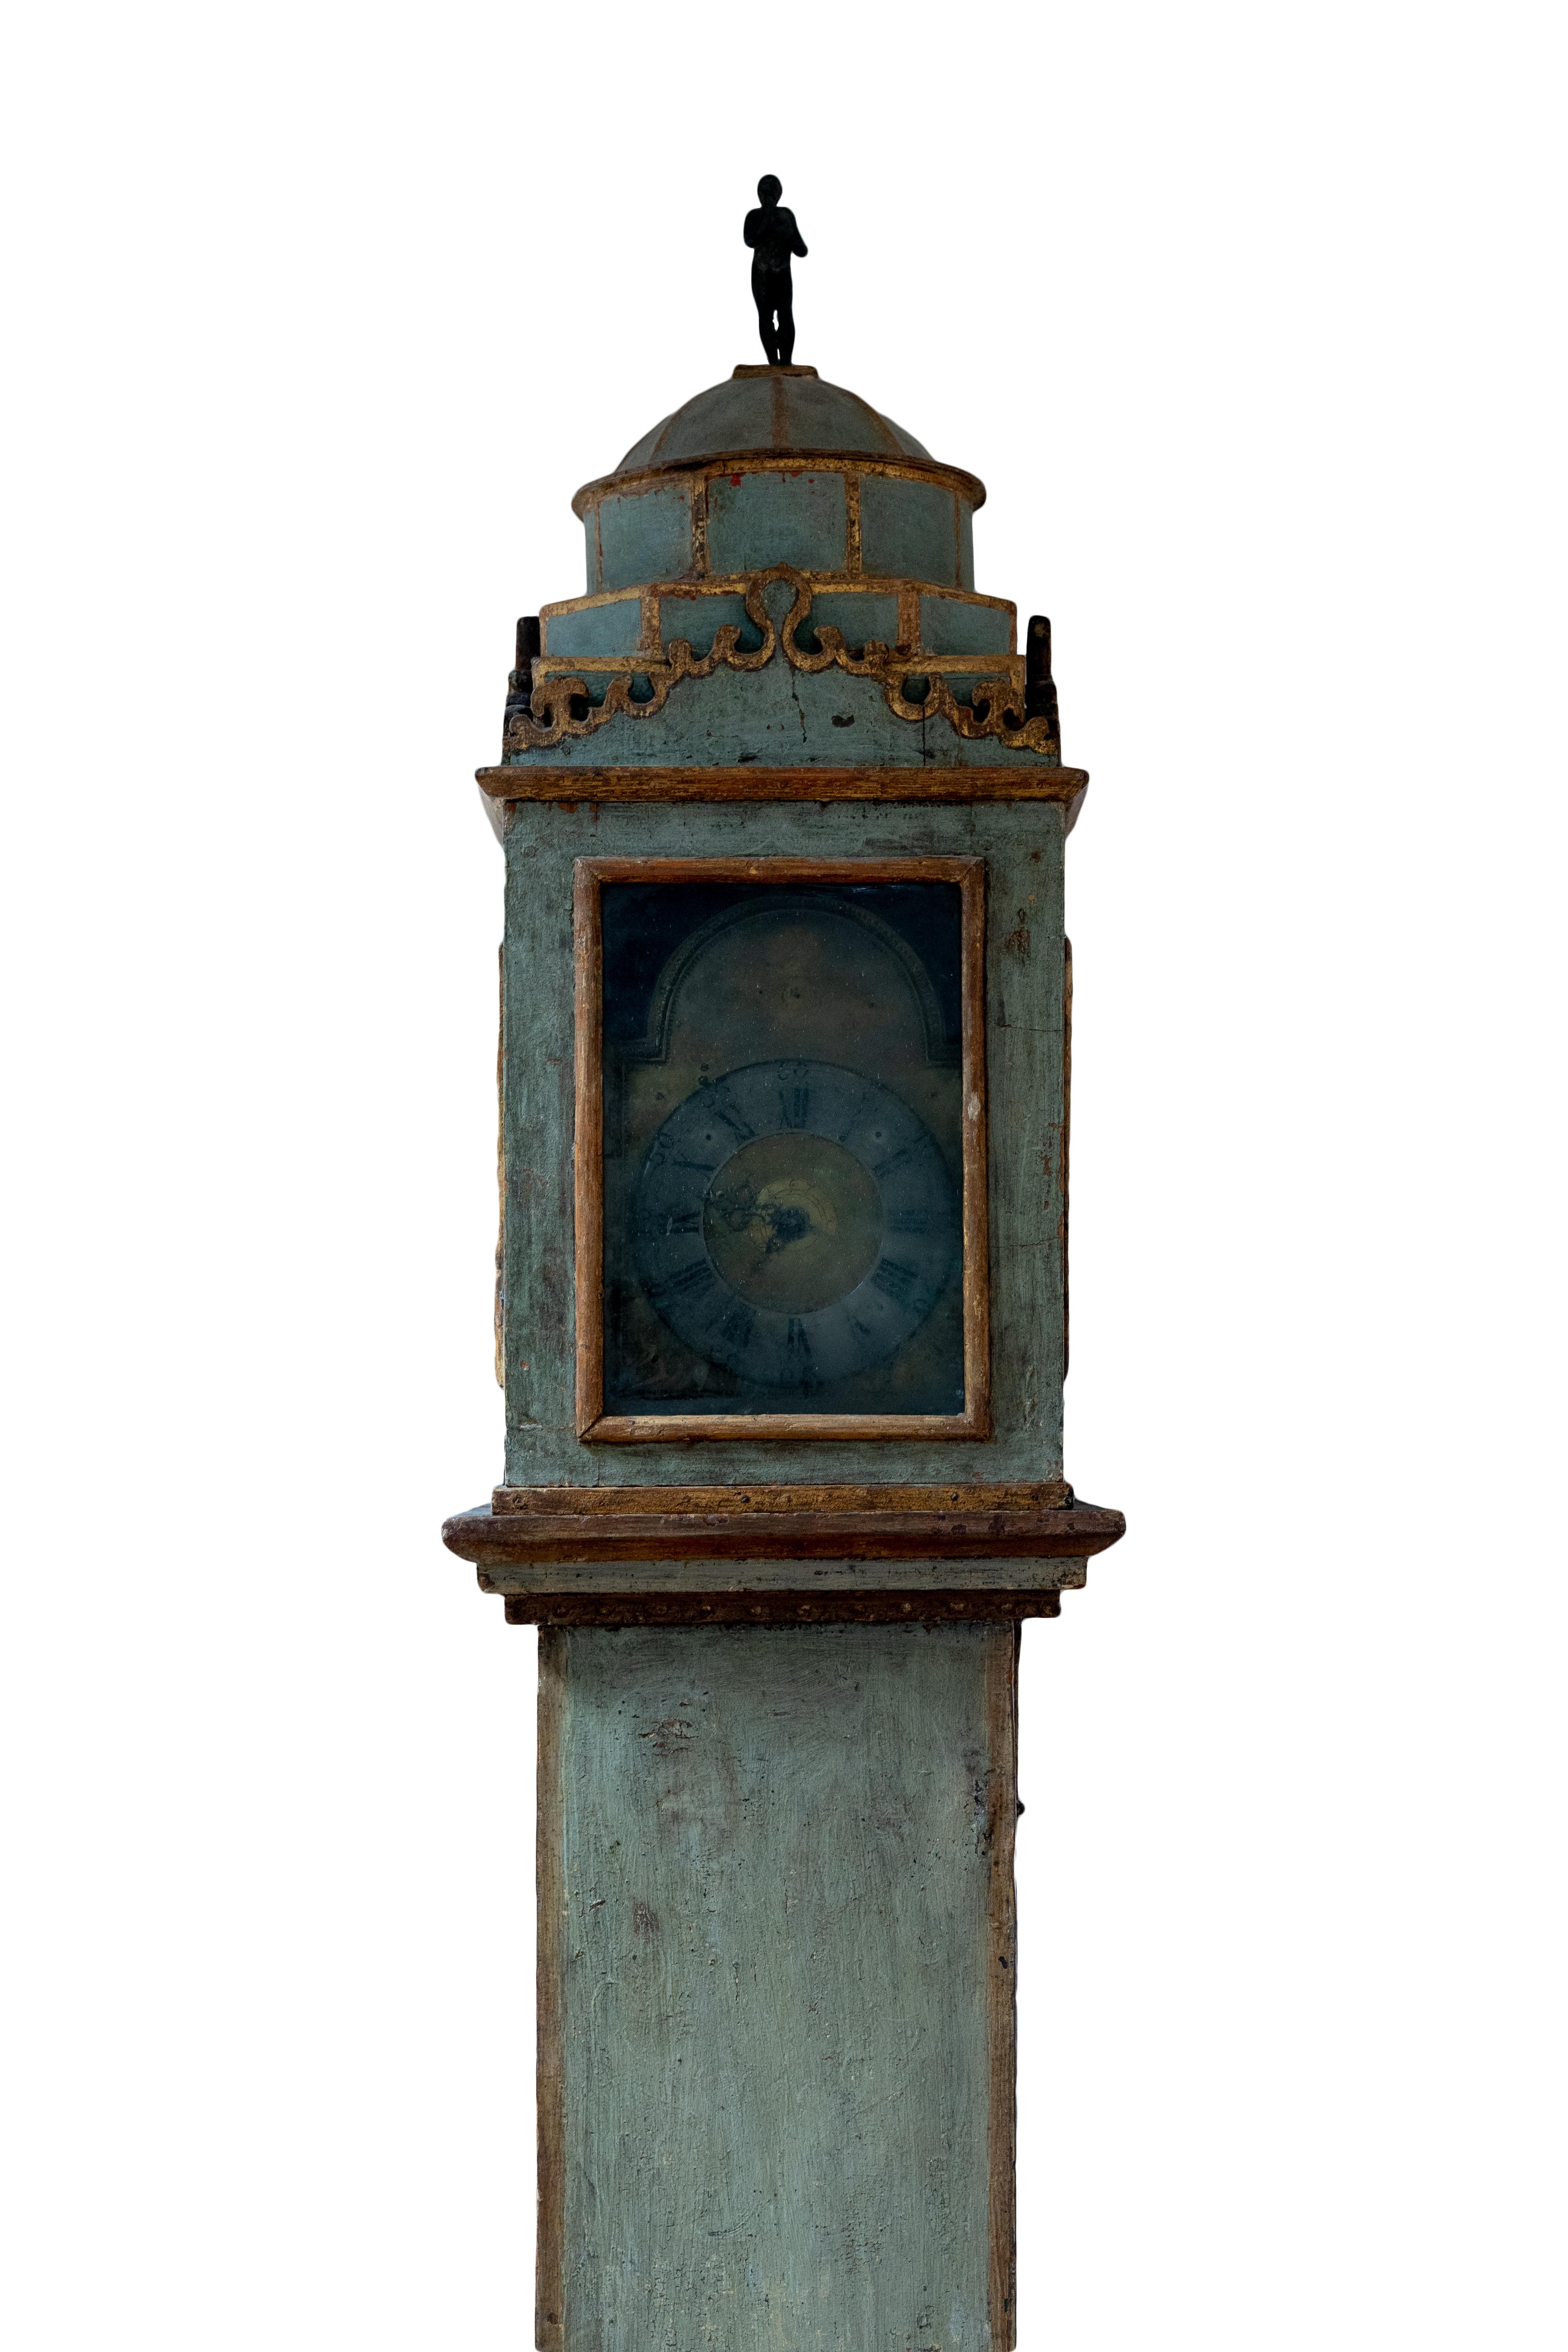 Swedish Pine Continental Clock with pendulum from the early 19th Century. This is a traditional floor clock that is commonly referred to as a Mora clock. It is made from pine wood, which is native to Sweden, and features a distinctive green-blue